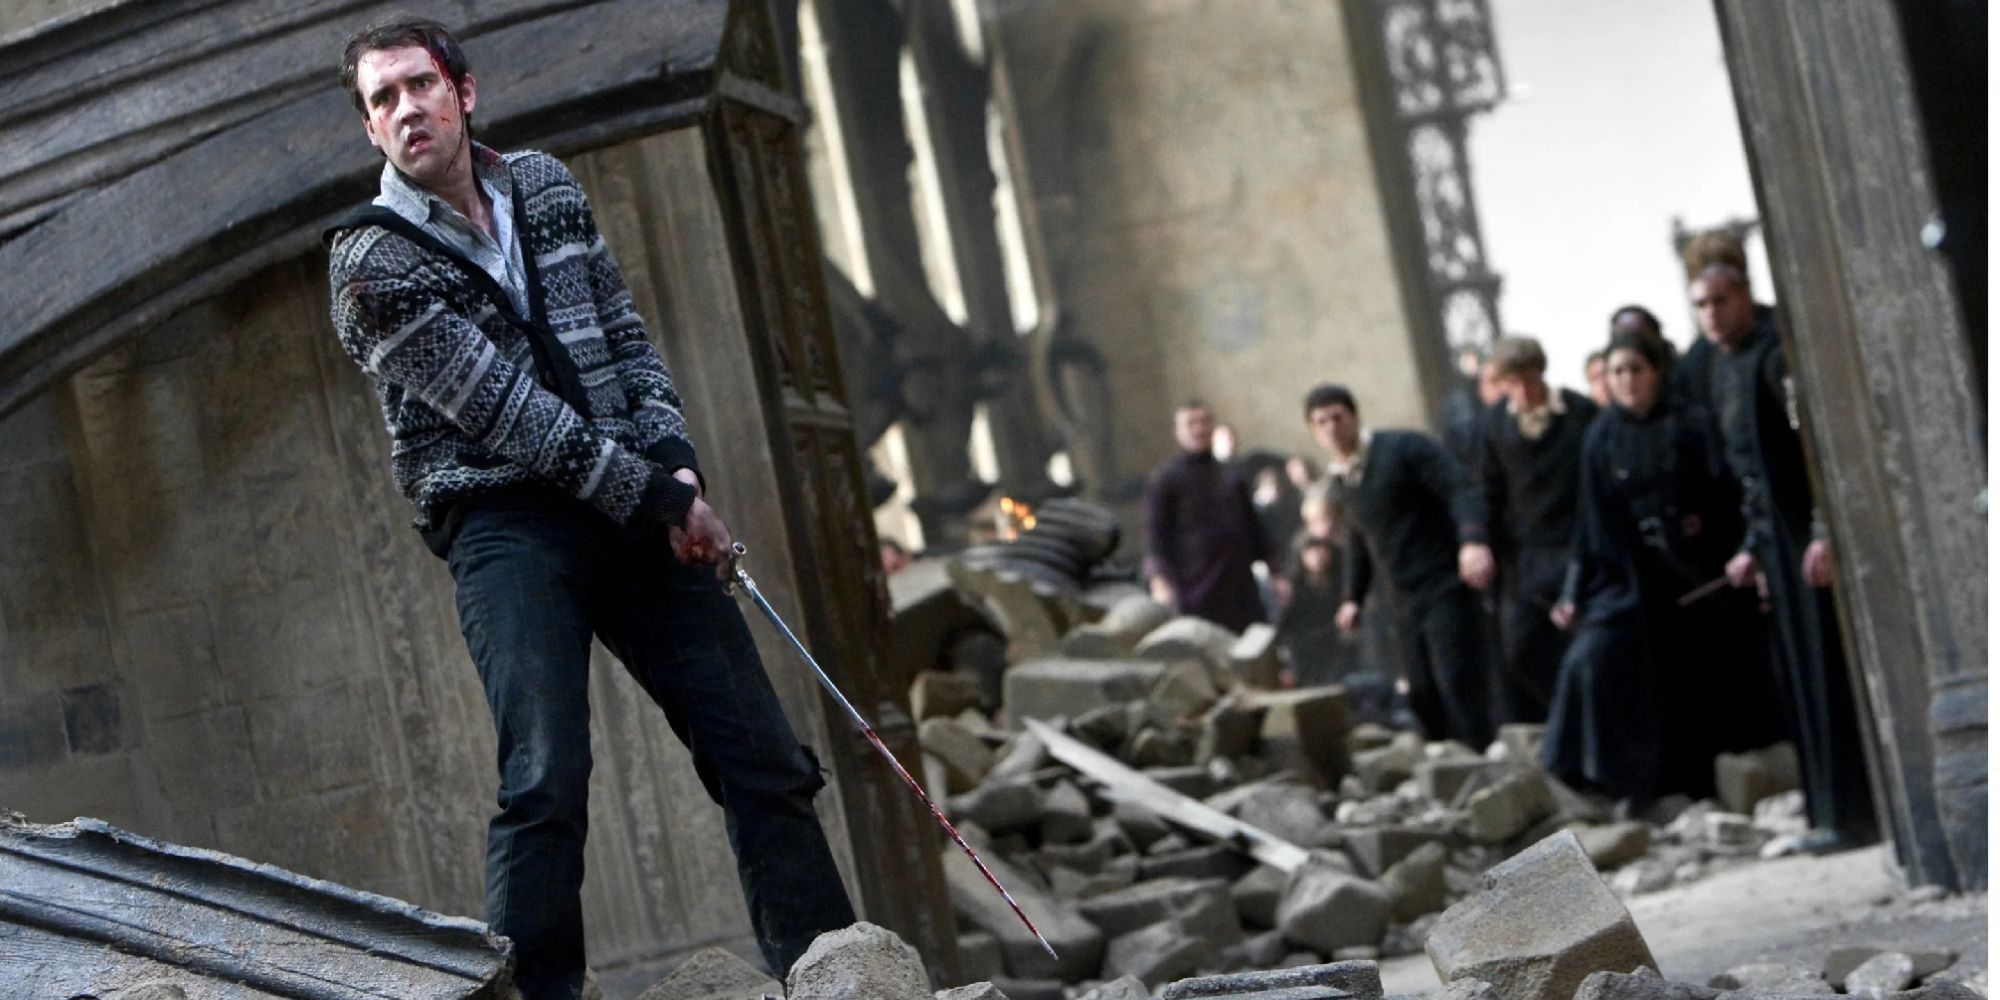 Neville Longbottom, played by Matthew Lewis, holding the Sword of Gryffindor in 'Harry Potter and the Deathly Hallows: Part 2.'